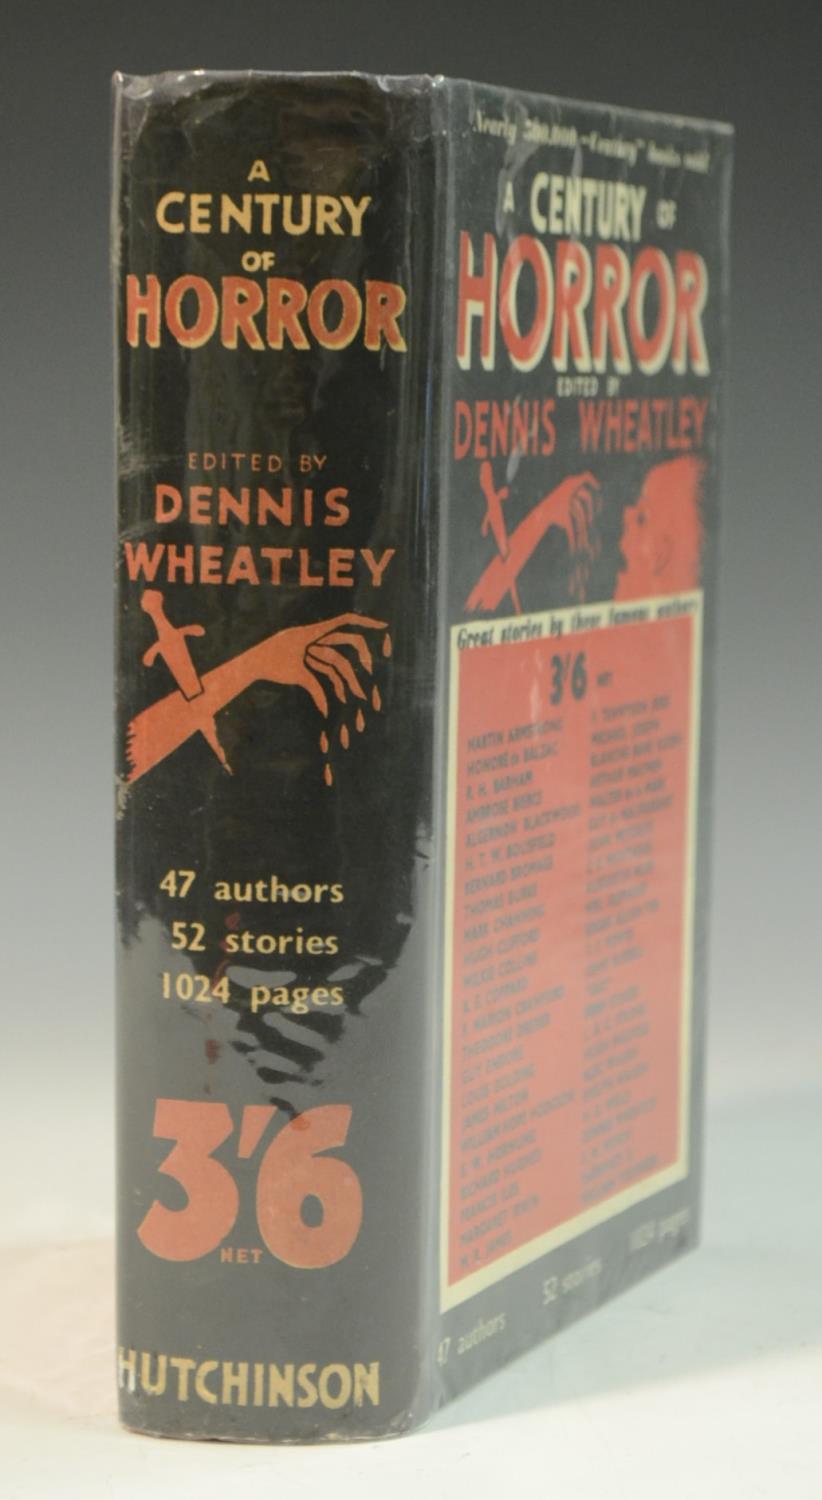 Wheatley (Dennis, editor), A Century of Horror Stories, first edition thus, London: Hutchinson & Co. - Image 2 of 3